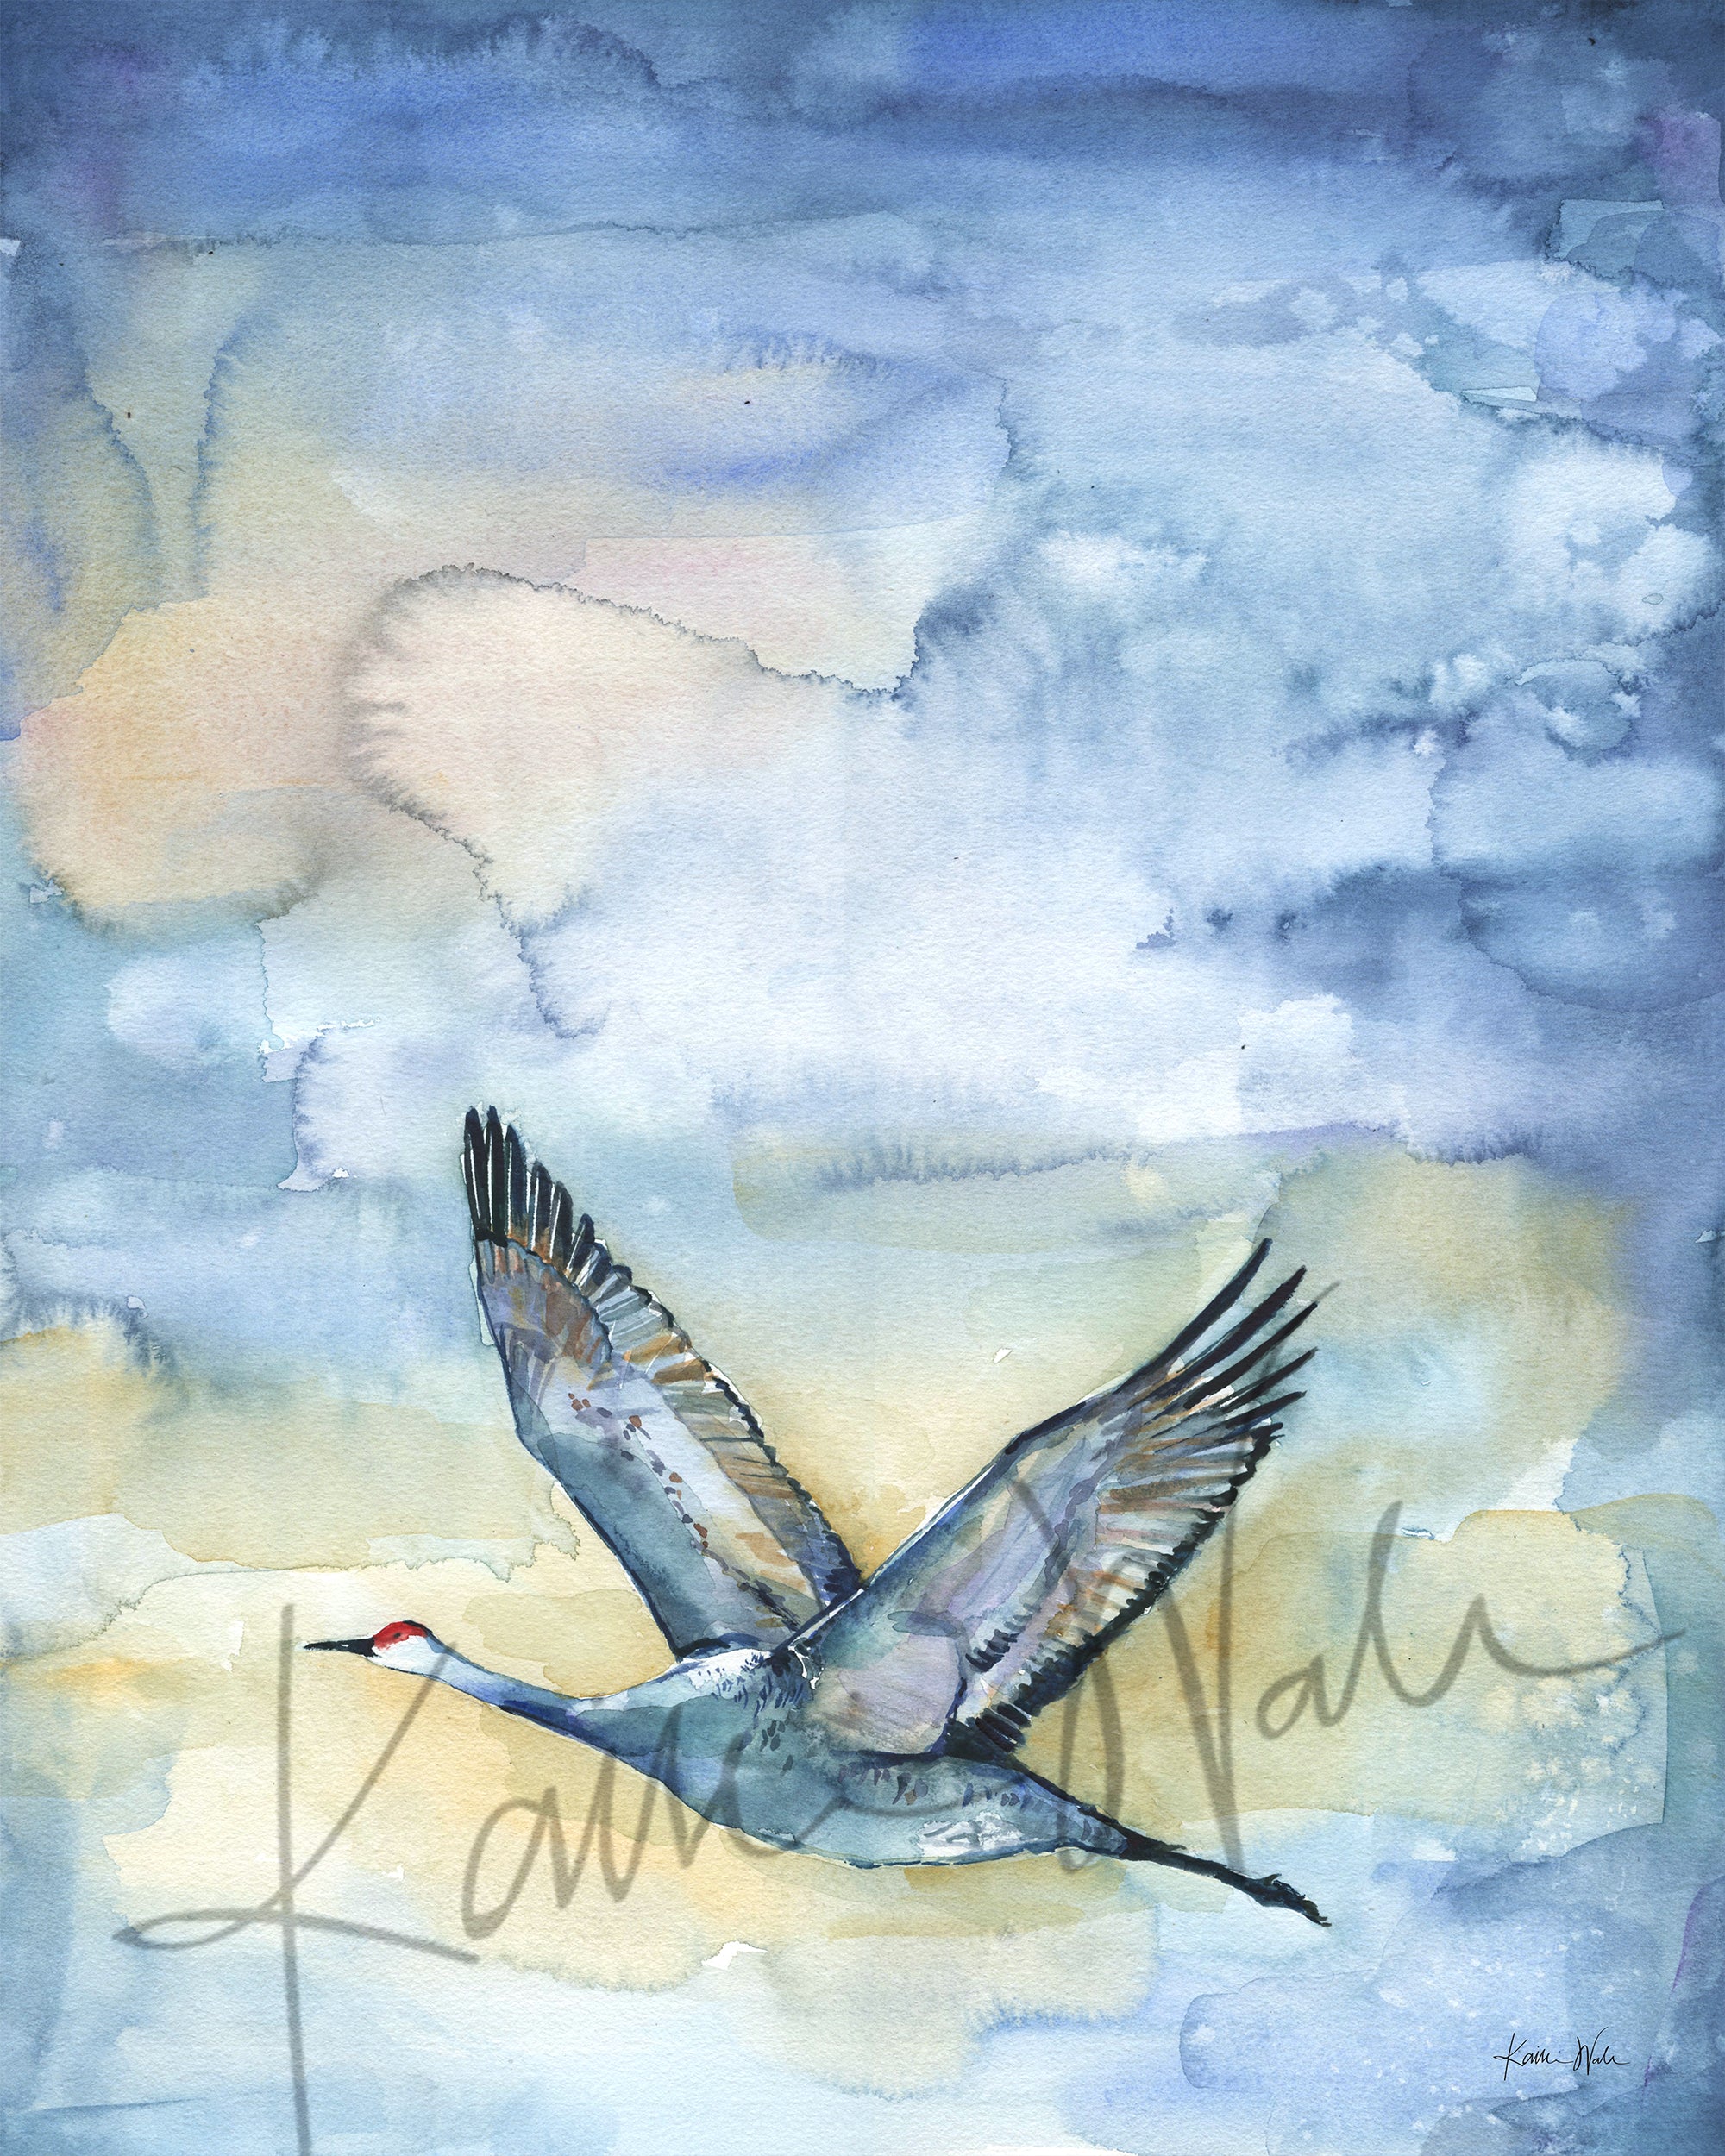 Unframed watercolor painting of a flying crane.